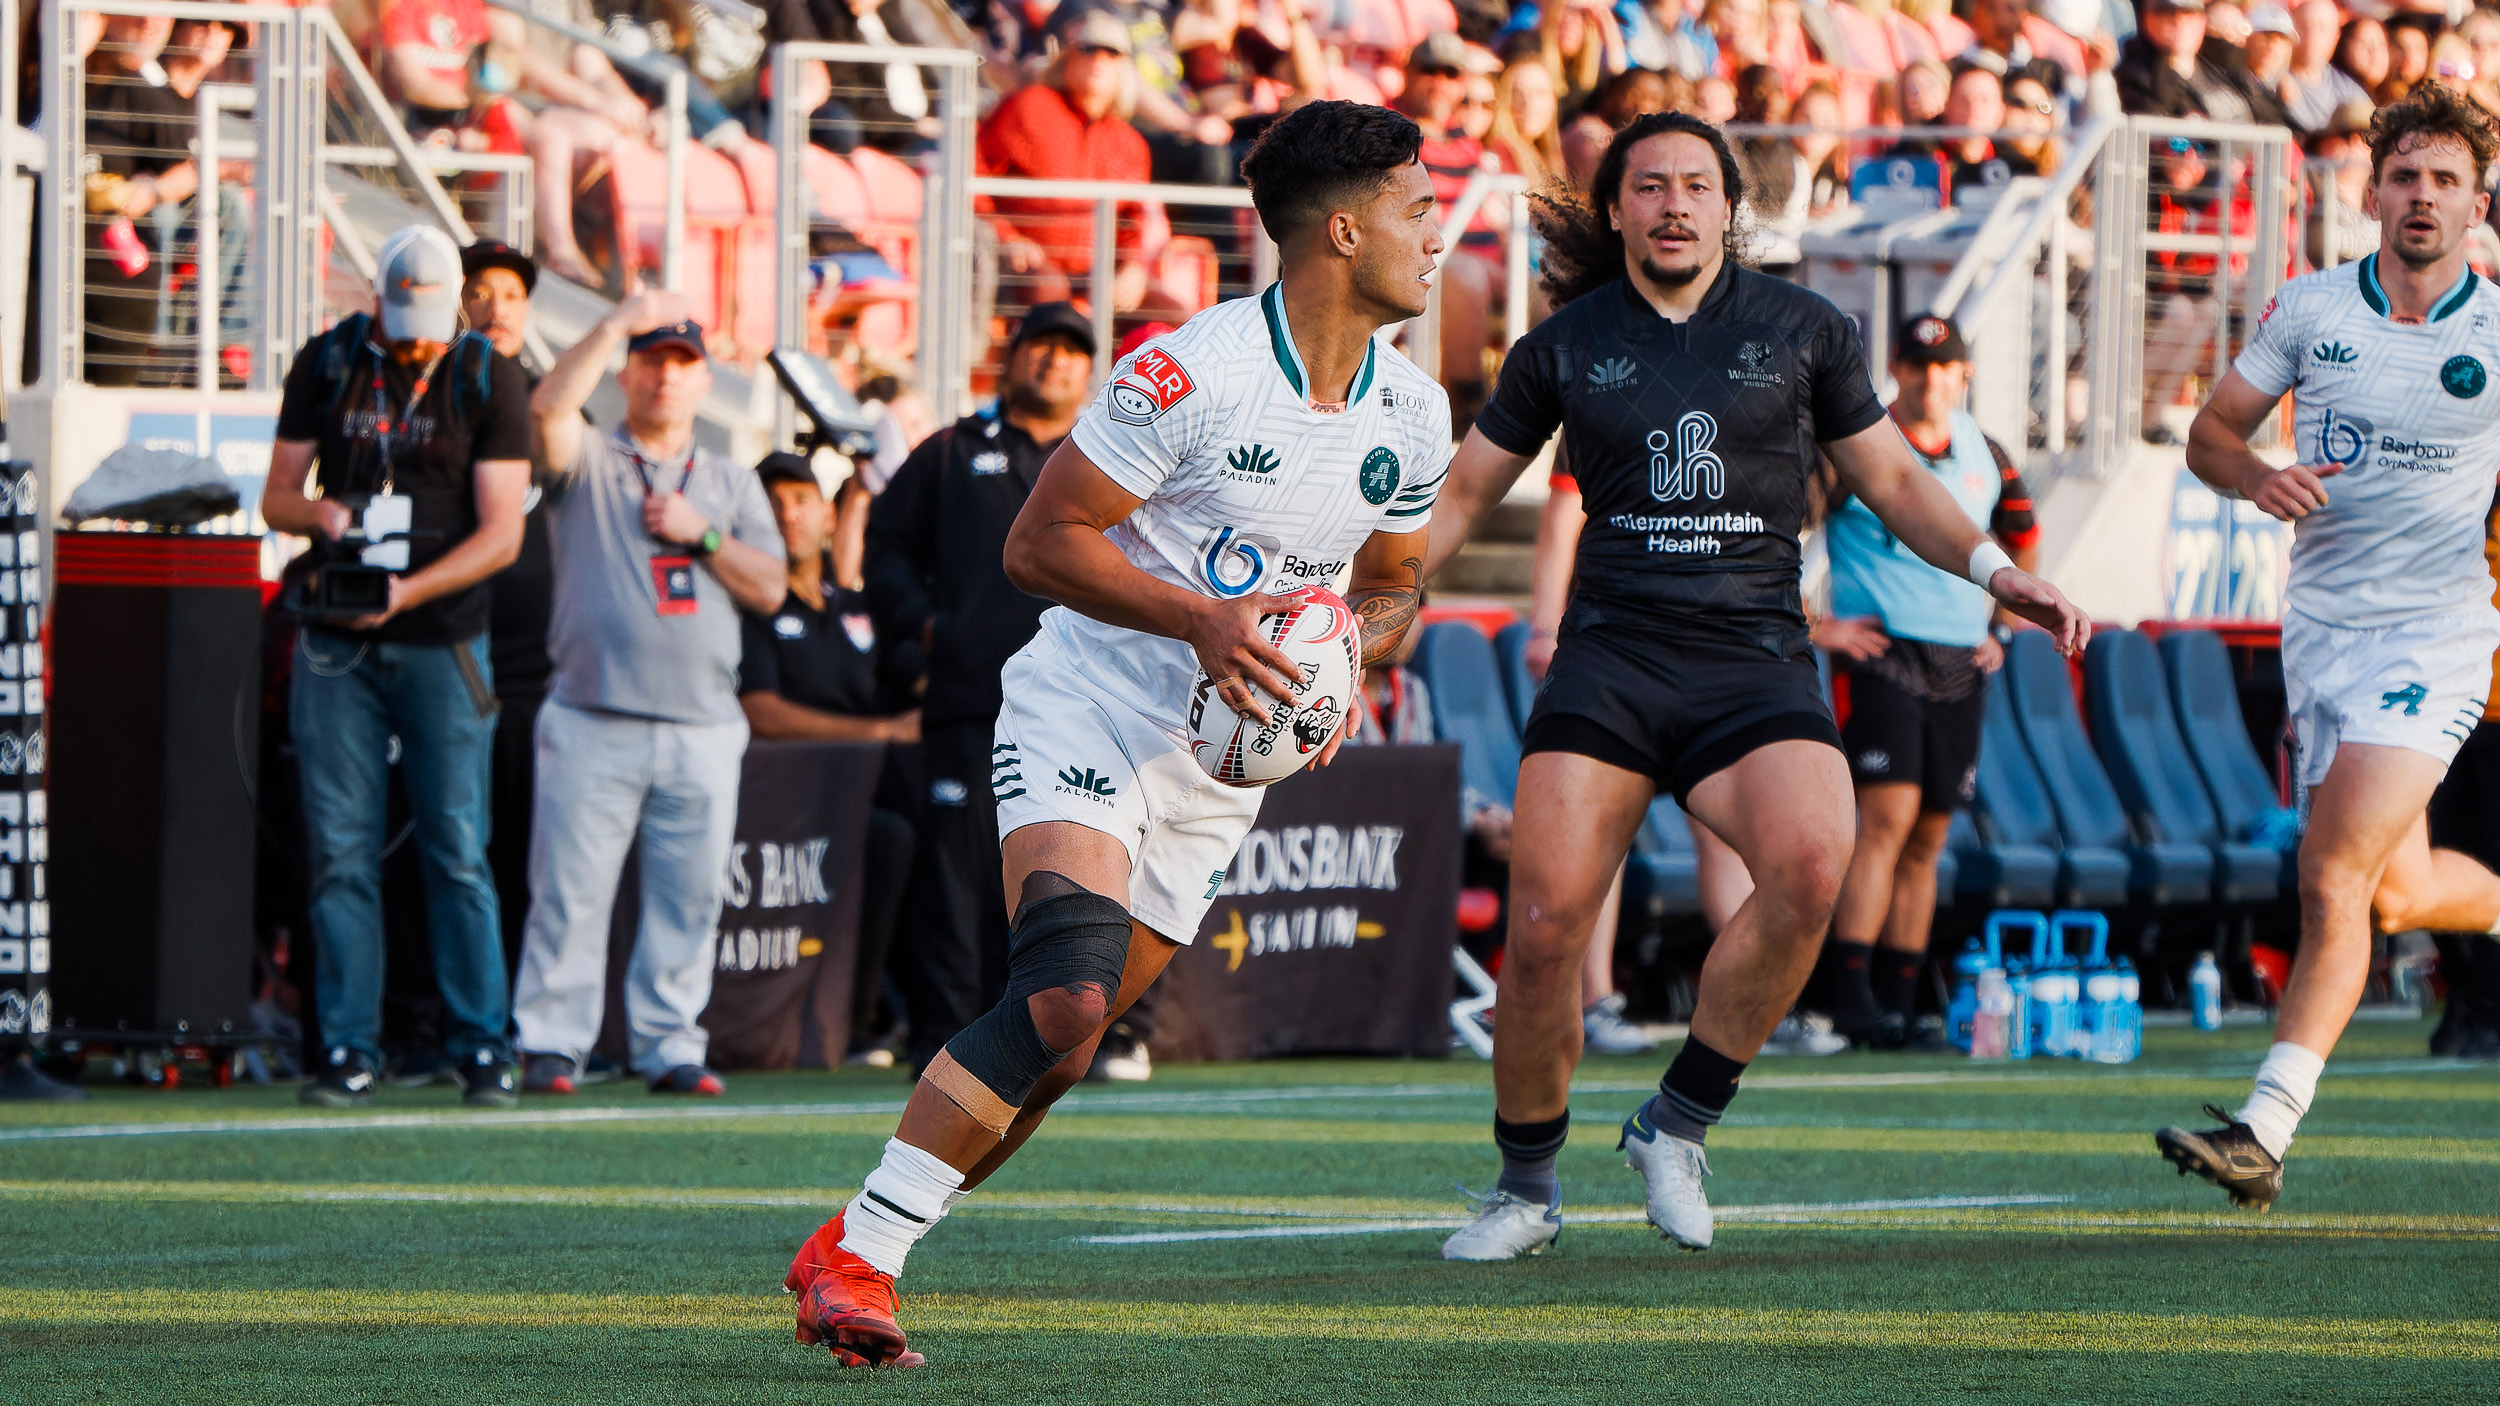 Arrows Acquire Biddle, Brown from Rugby ATL